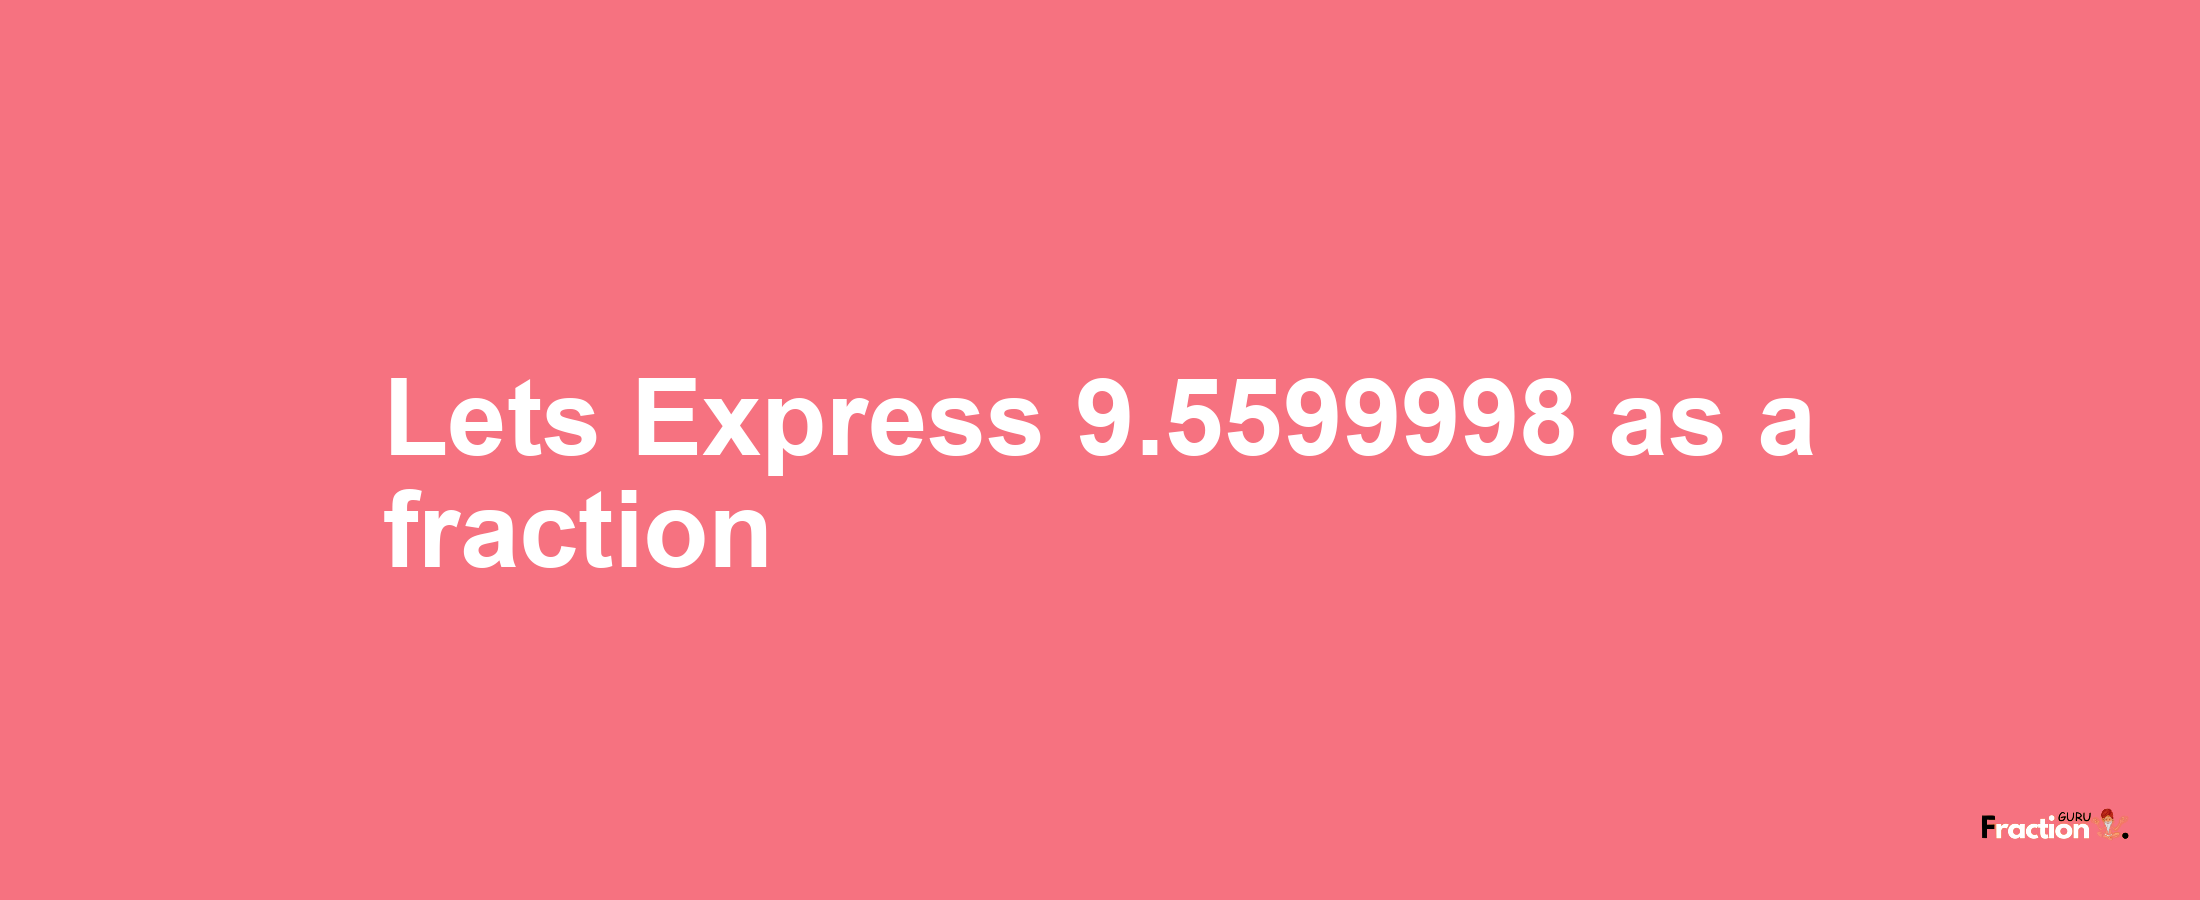 Lets Express 9.5599998 as afraction